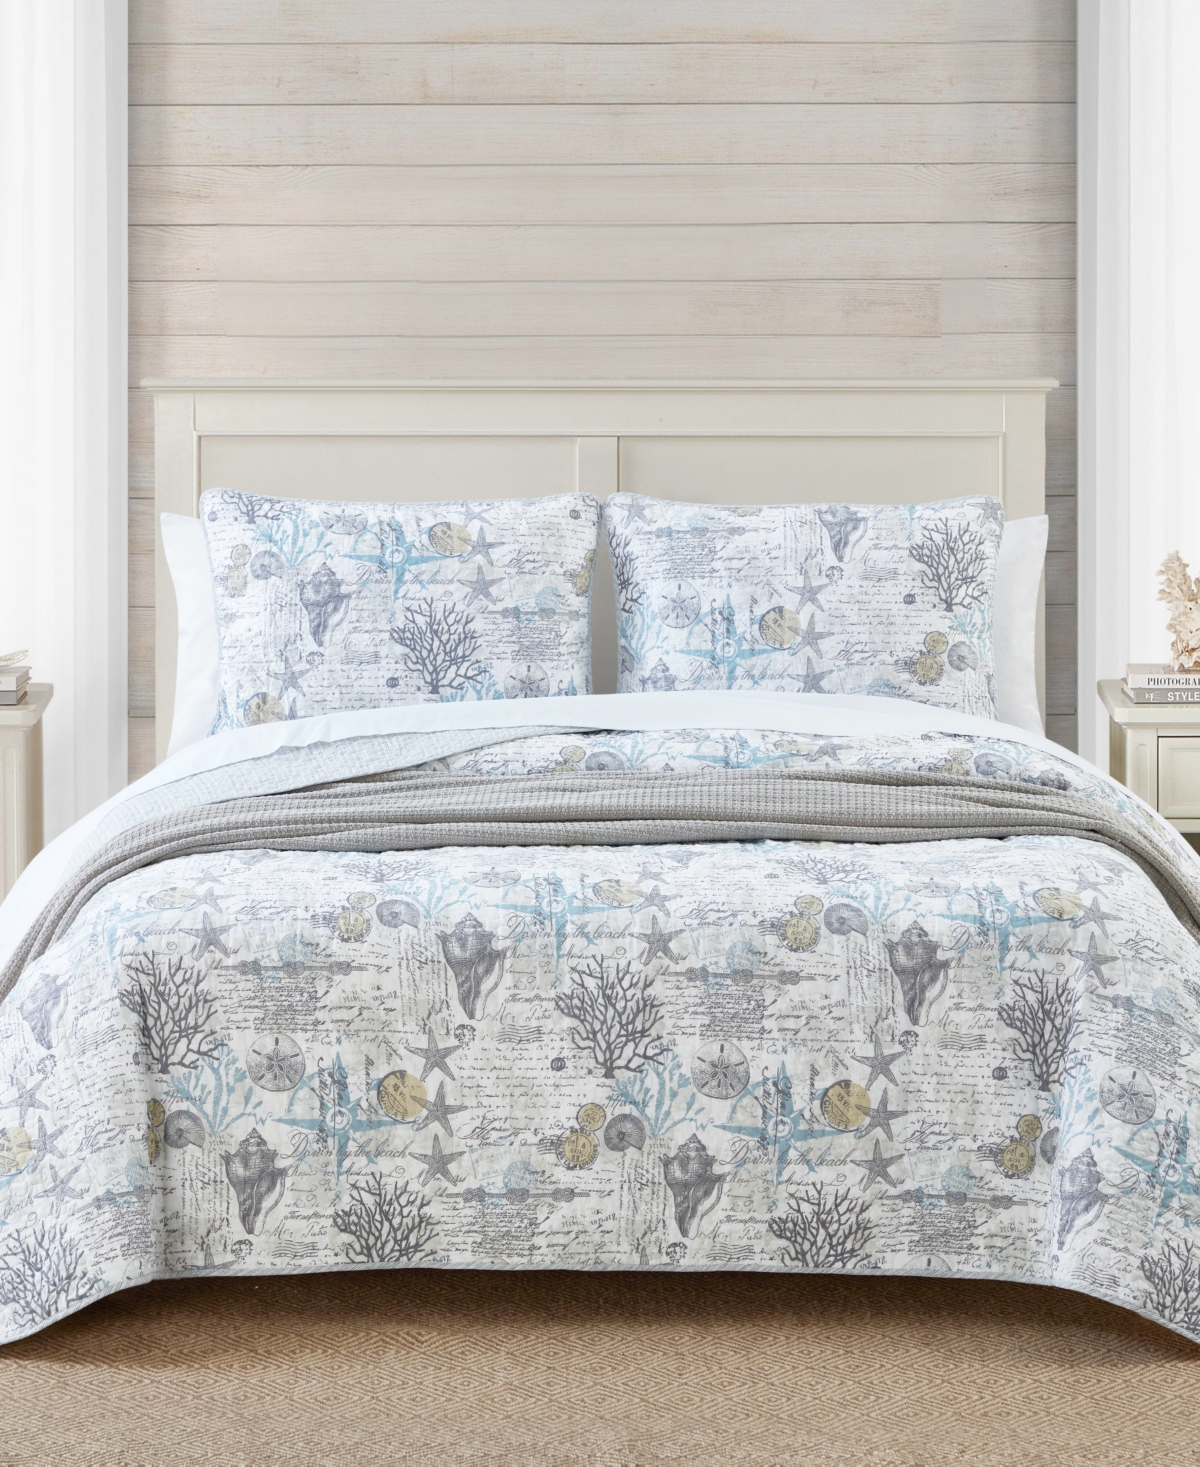 TOMMY BAHAMA HOME BEACH BLISS REVERSIBLE 3 PIECE QUILT SET, FULL/QUEEN BEDDING